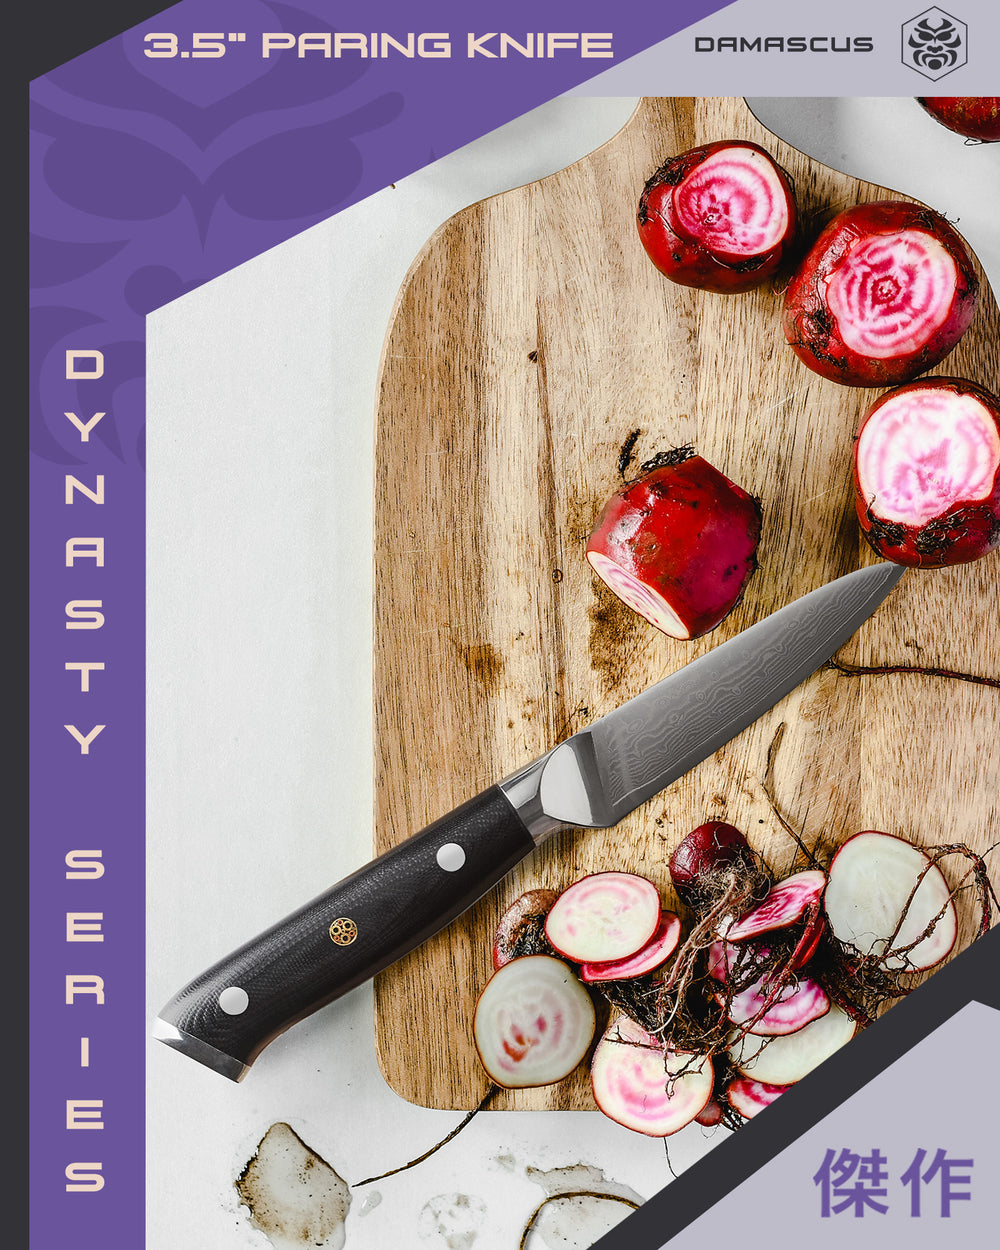 The Damascus Paring Knife with sliced radishes